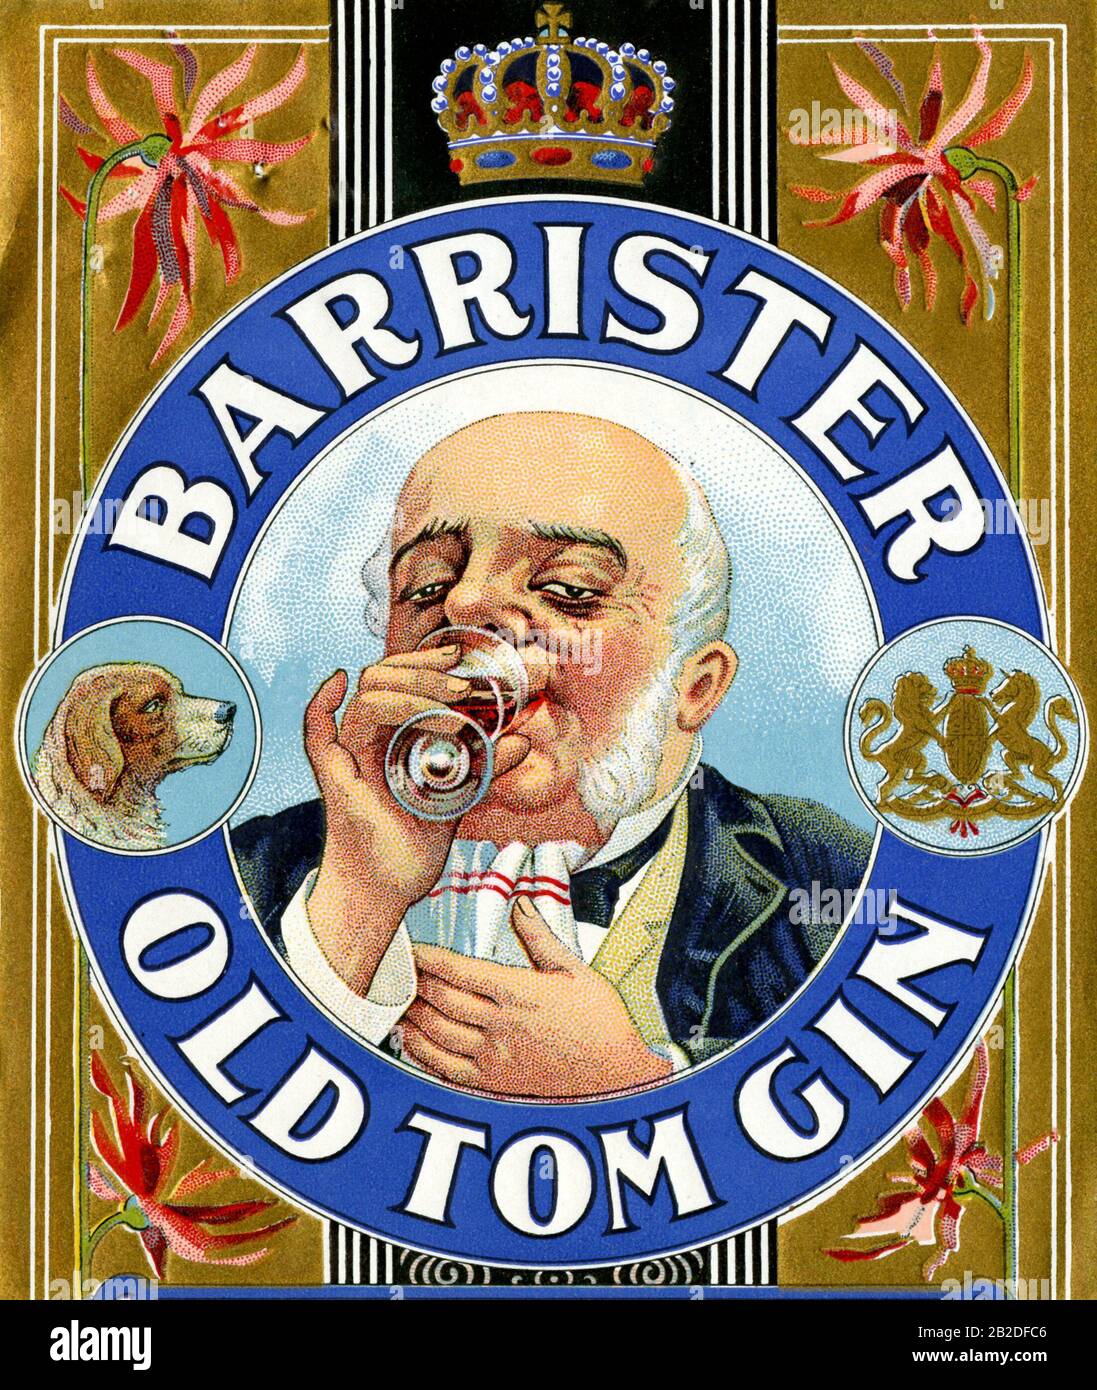 Barrister Old Tom Gin Stock - Alamy